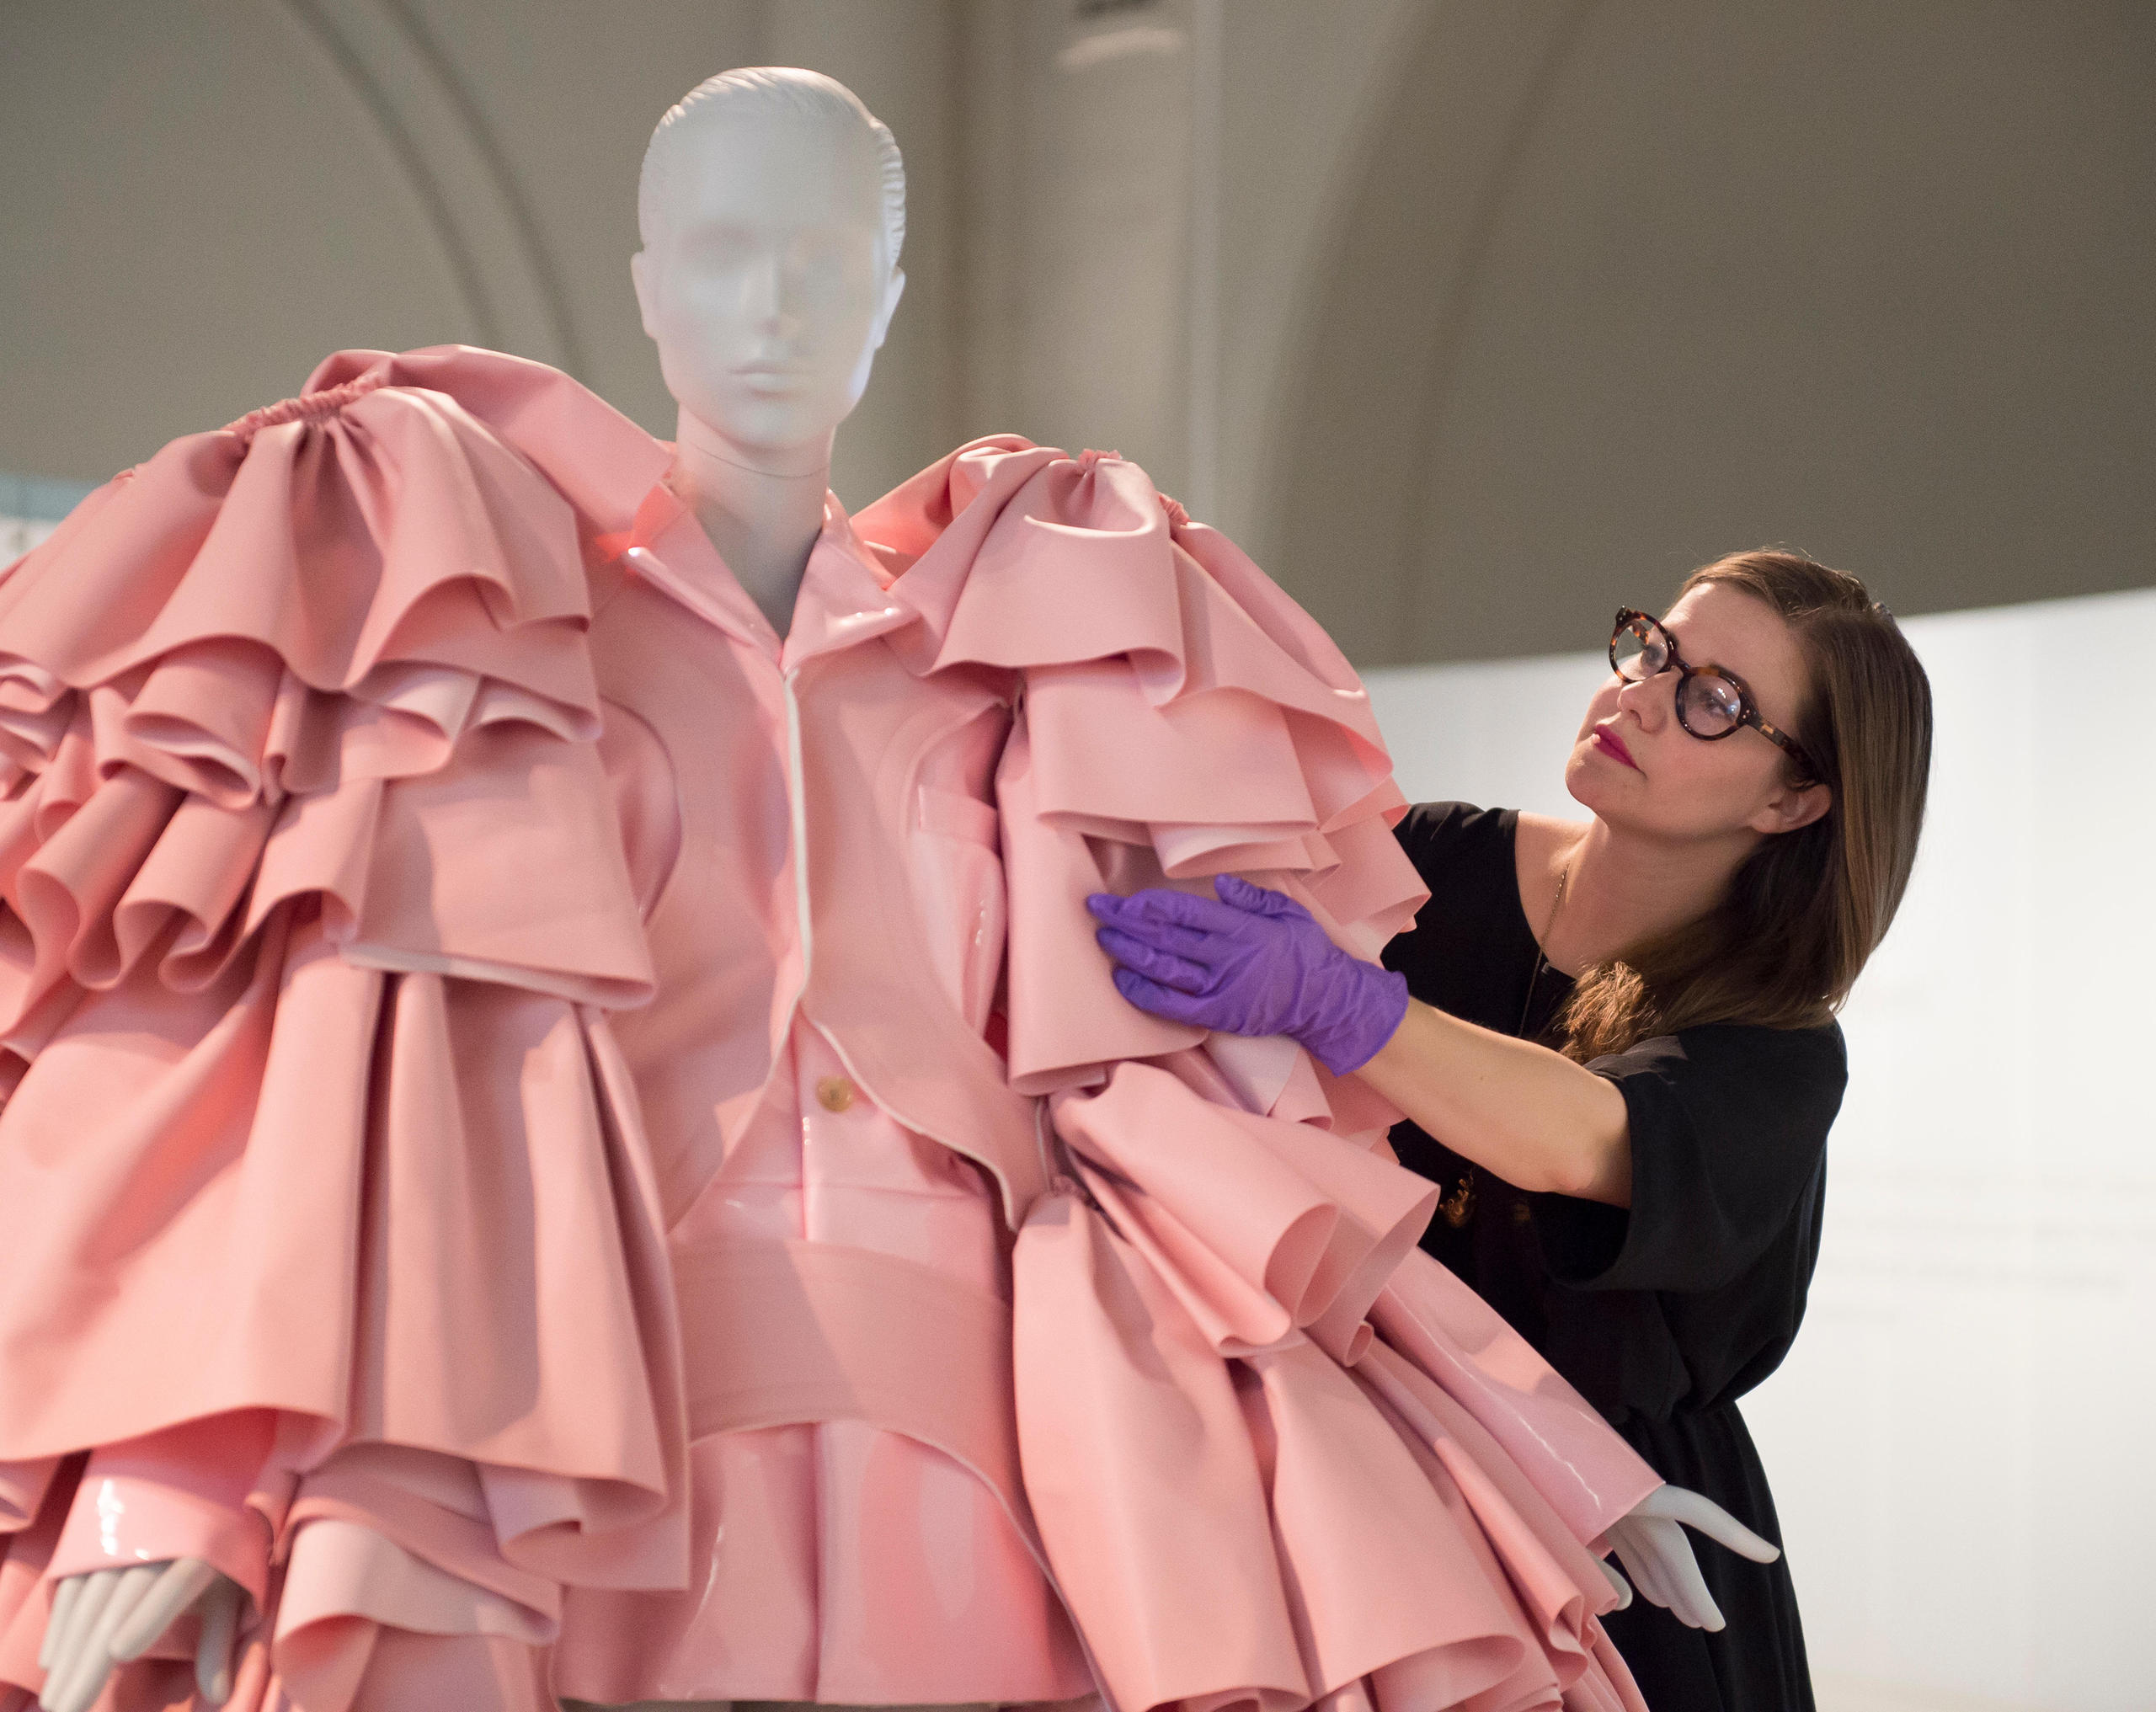 Cristobal Balenciaga fashion. A pink robe dressed on a mannequin.